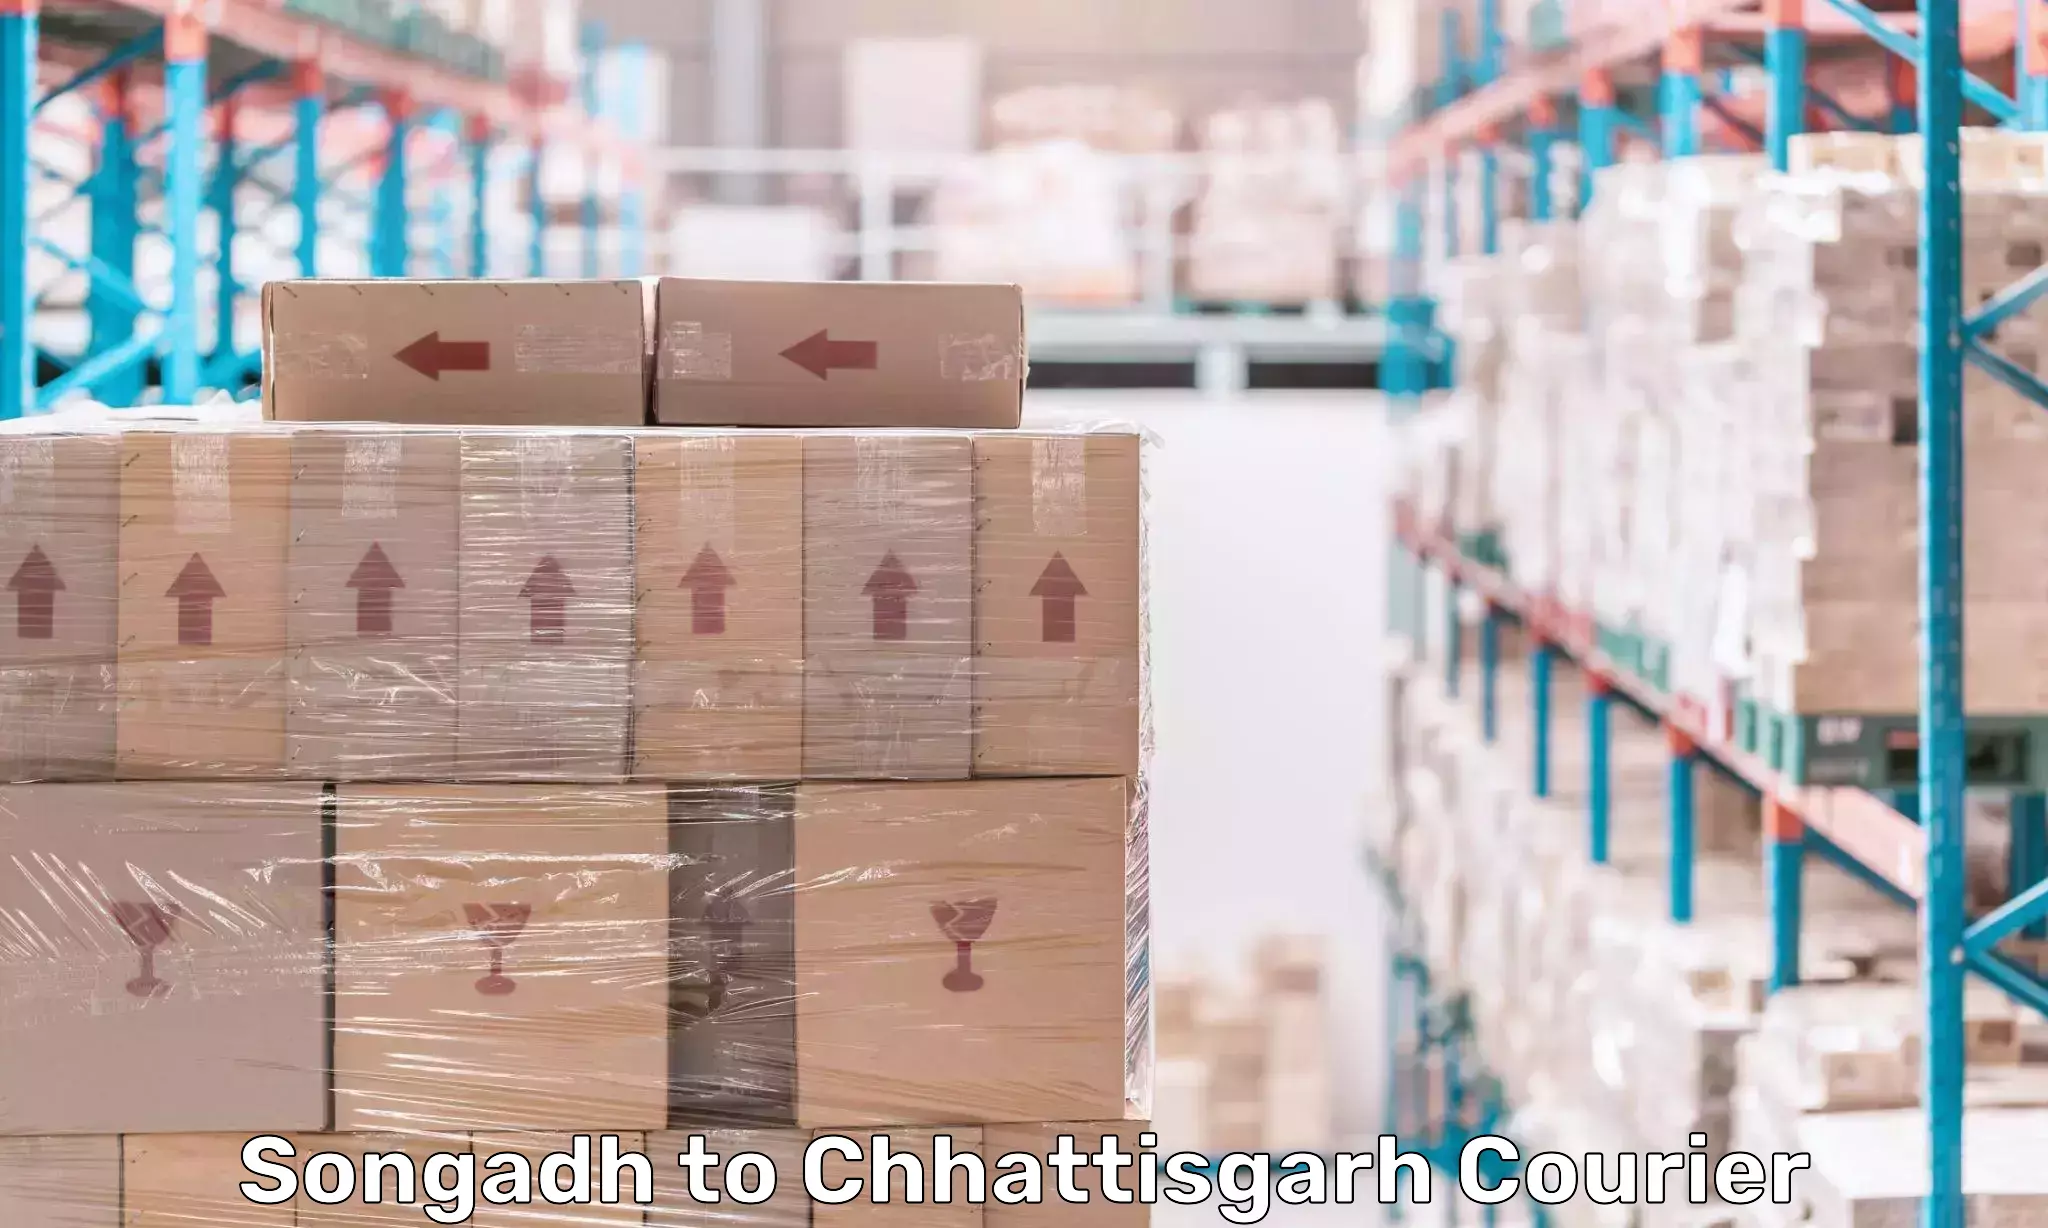 Full-service courier options Songadh to Chhattisgarh